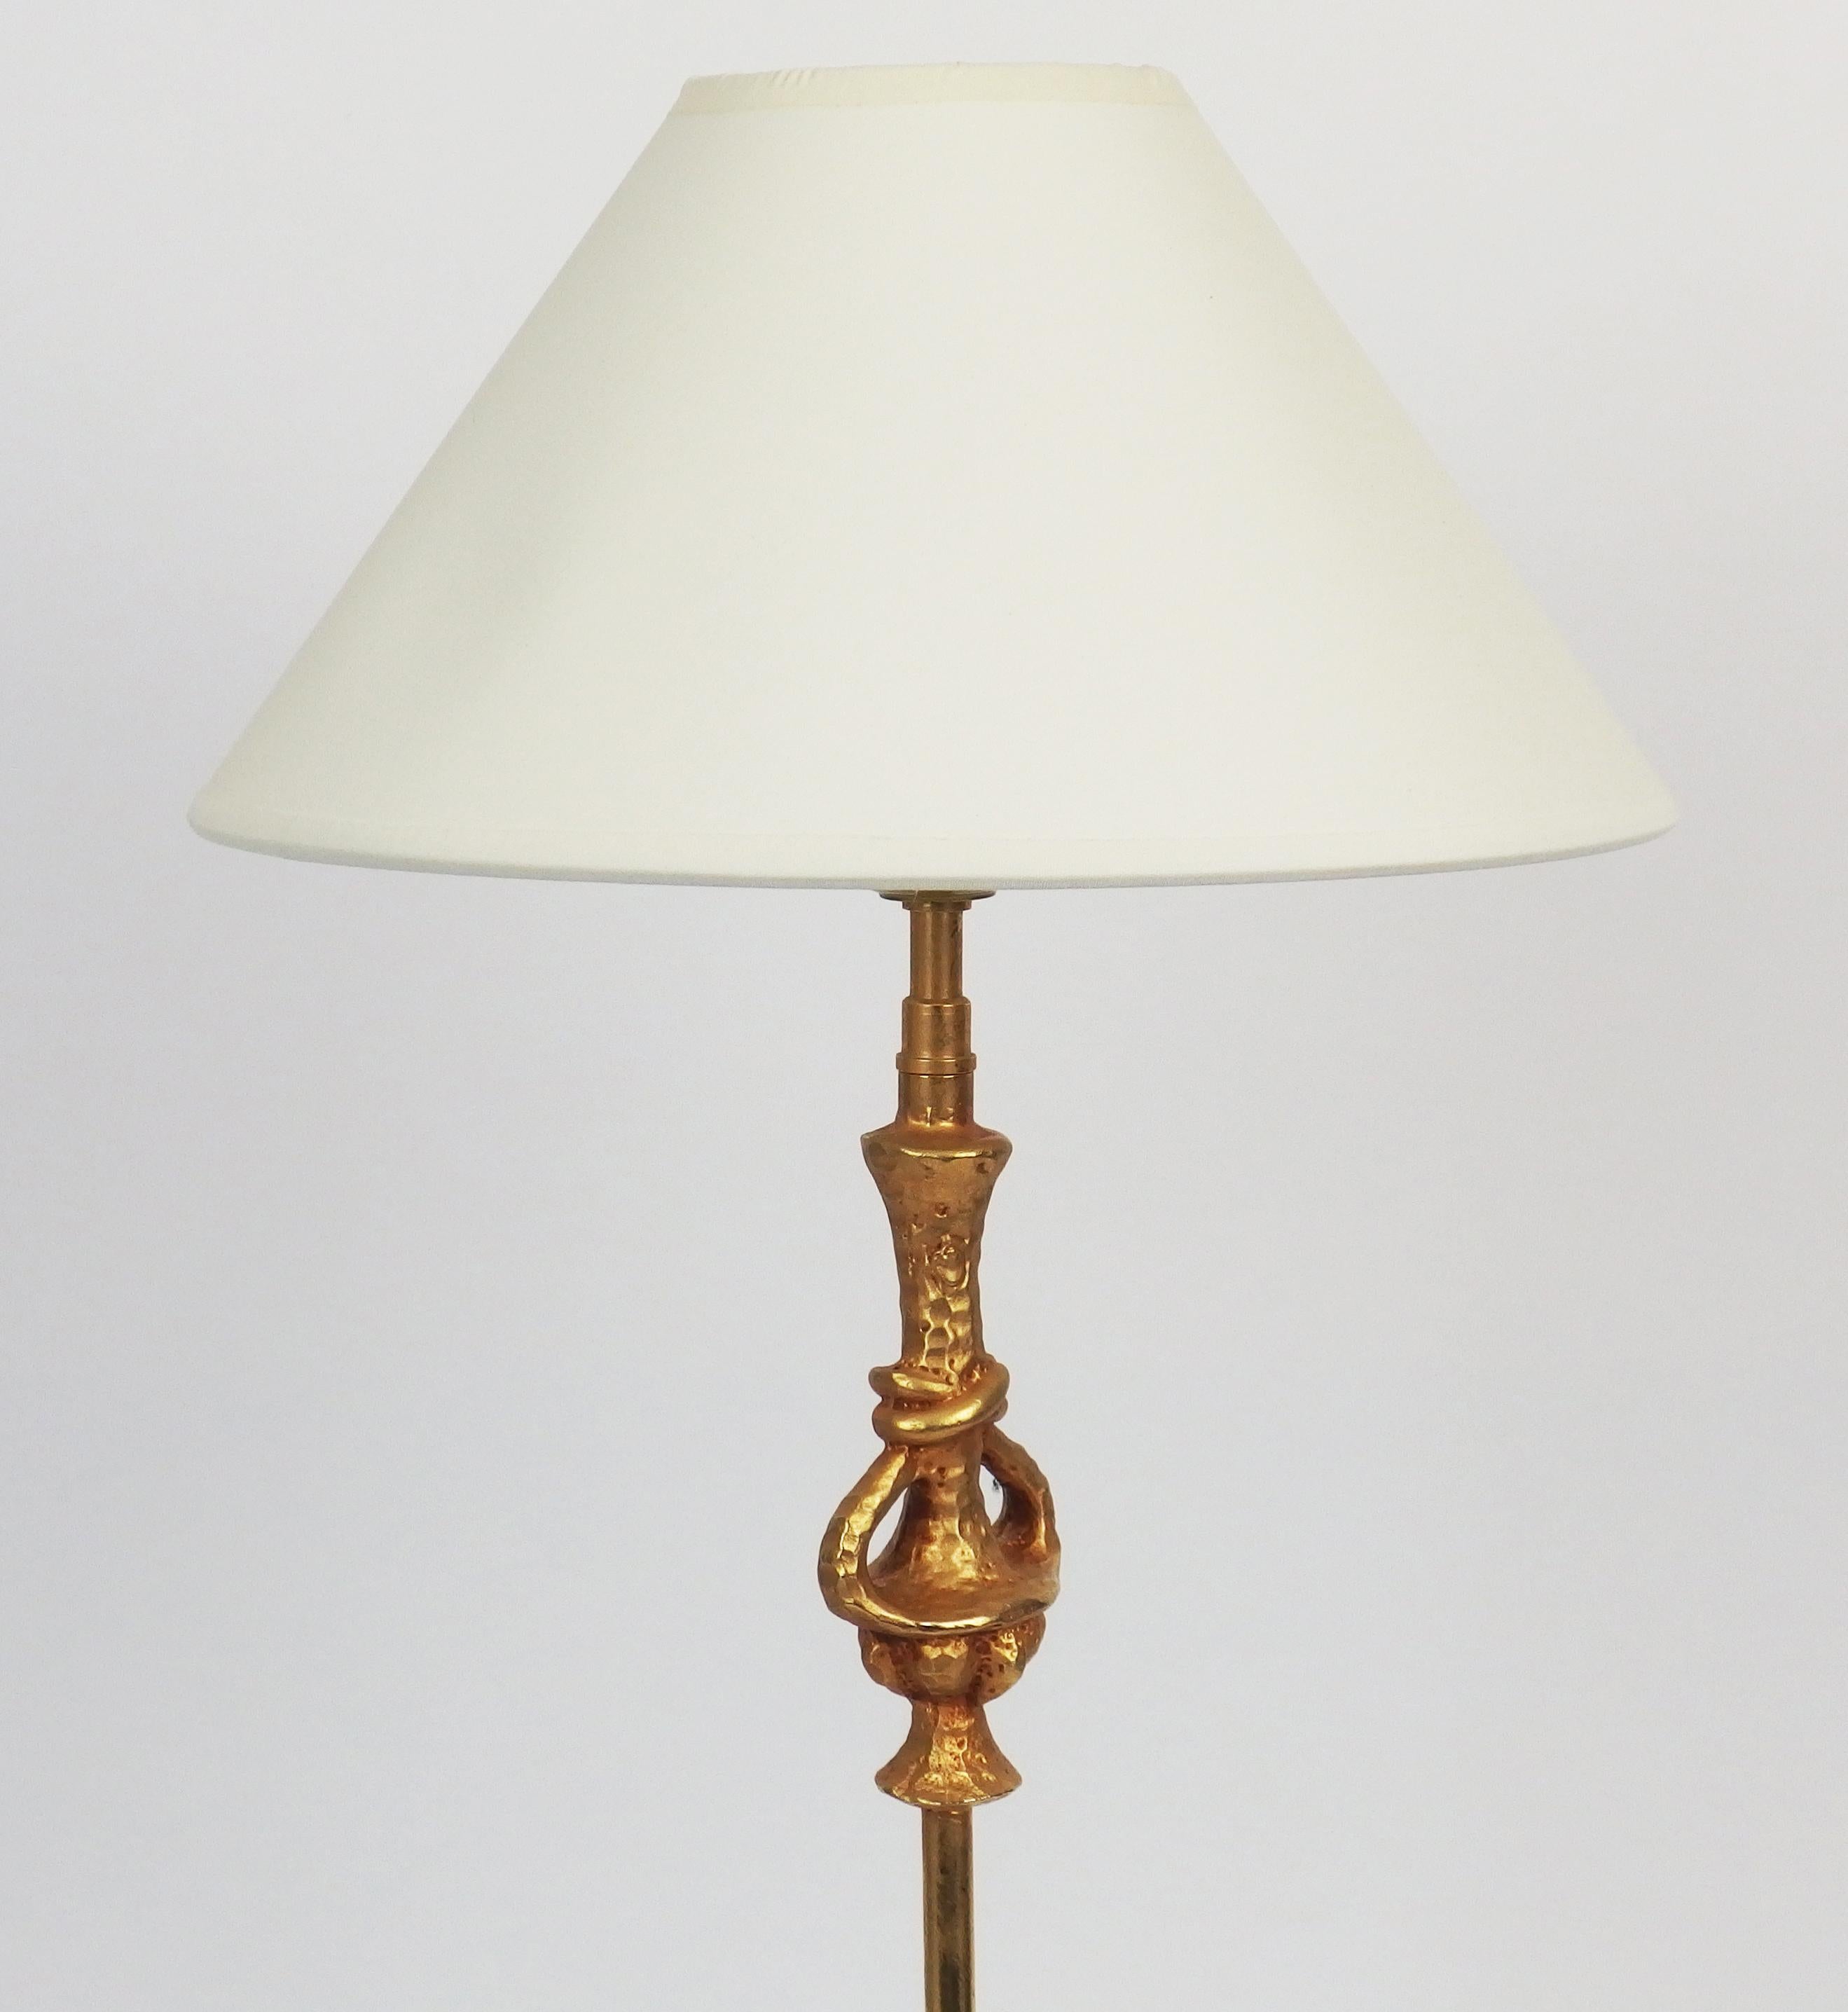 Late 20th Century Pair of Gilt Metal Table Lamps by Nicolas De Wael for Fondica For Sale